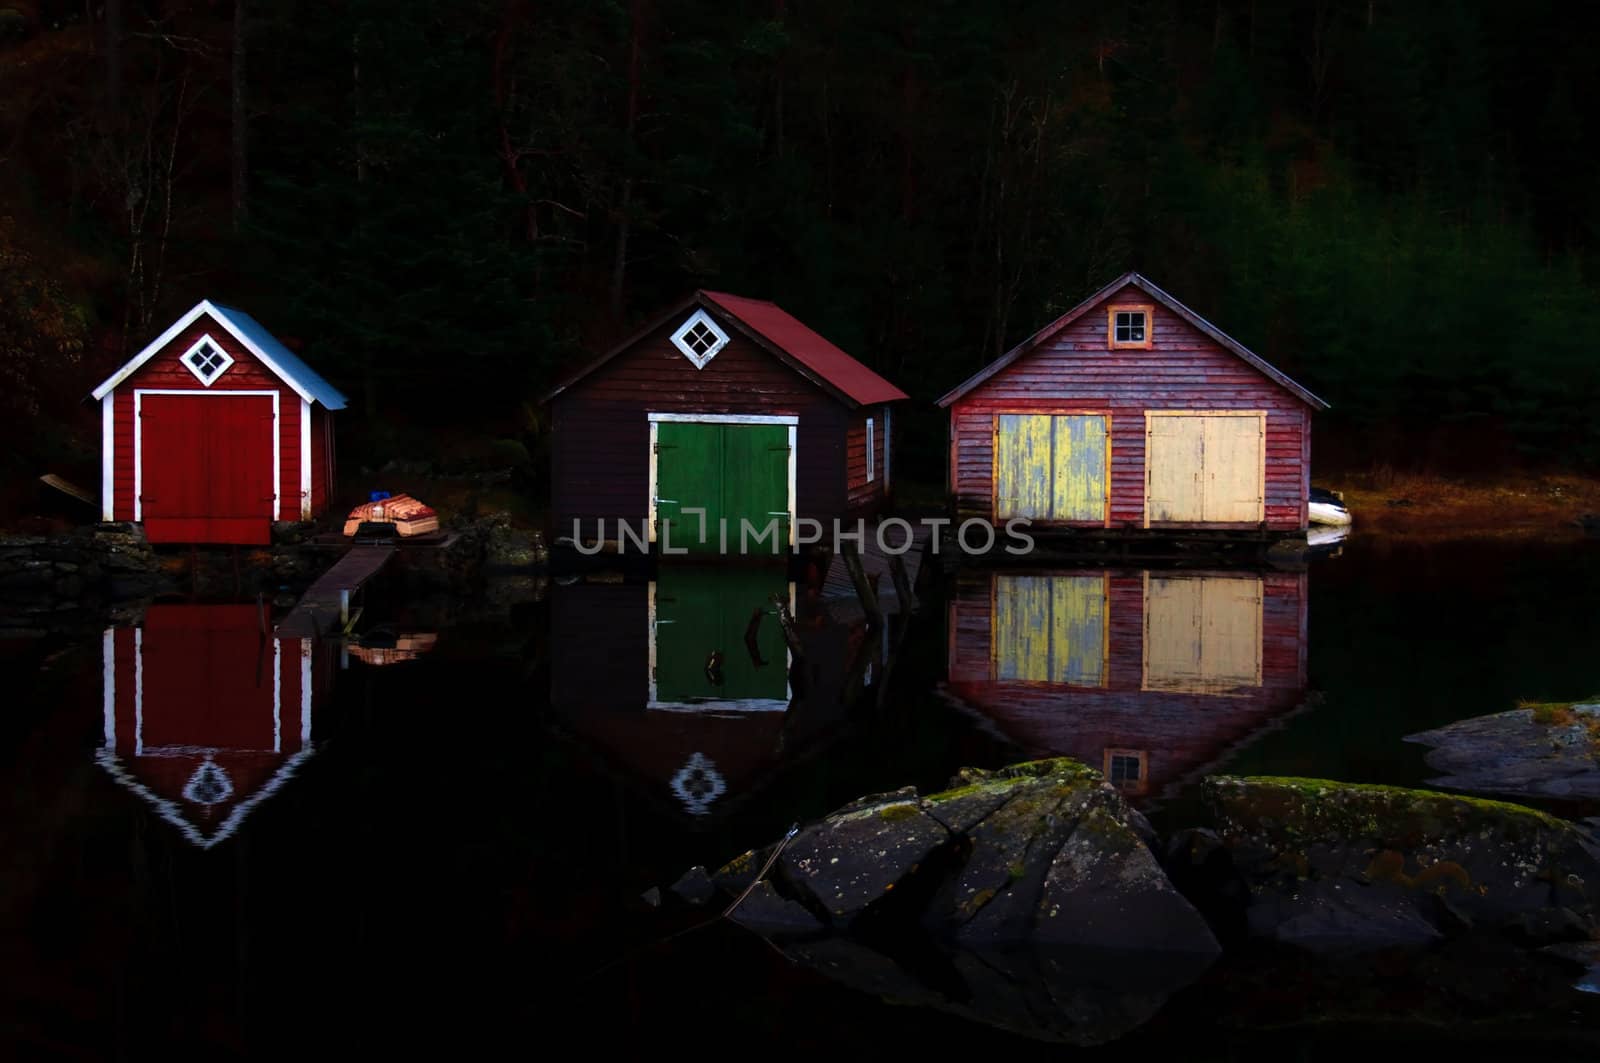 Three boathouses in the evening making reflections